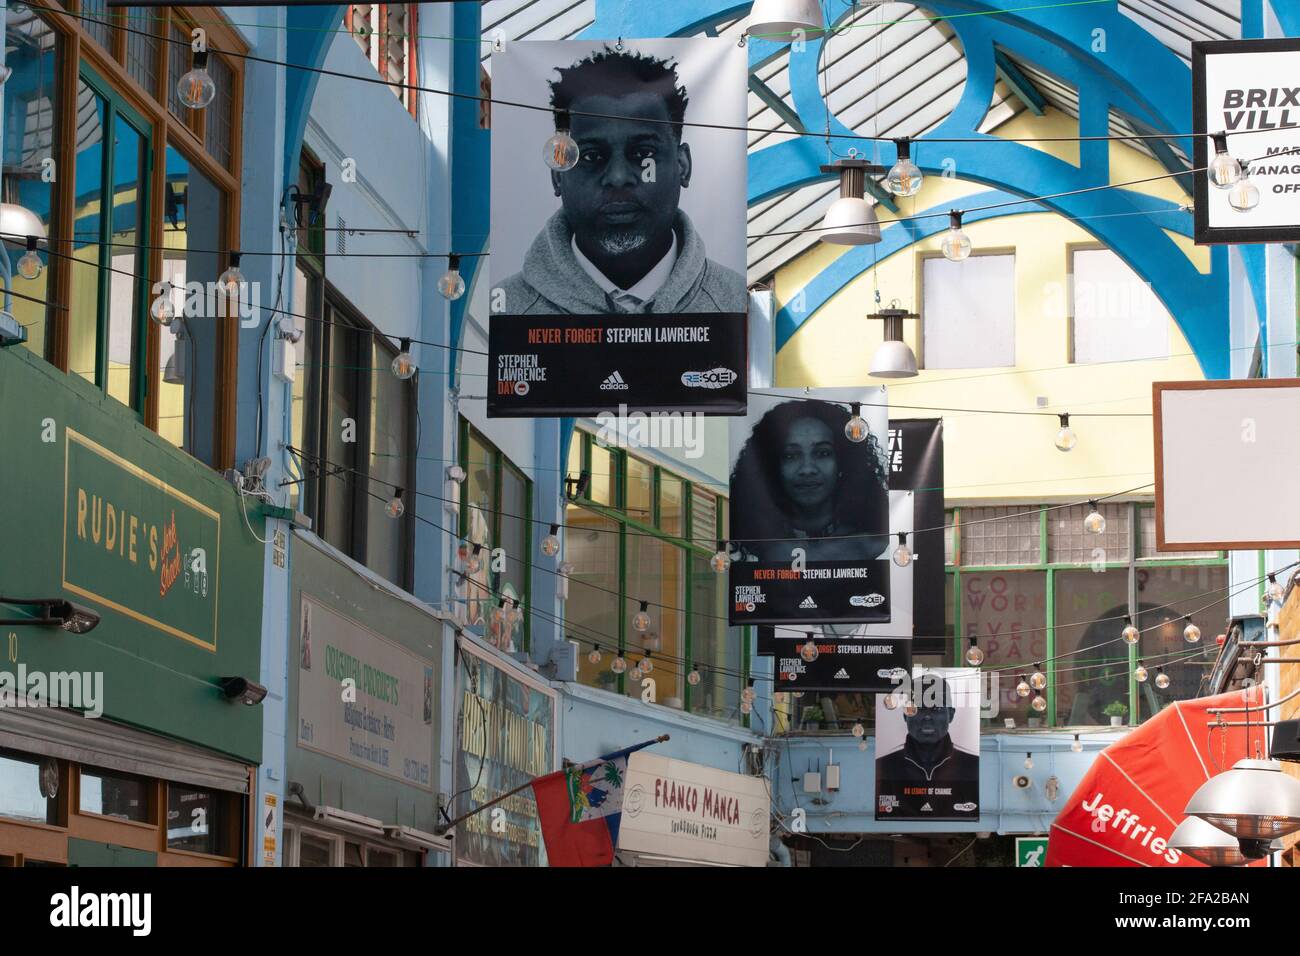 London, UK. 22nd Apr, 2021. On the anniversary of the murder of Stephen Lawrence in 1993, the Stephen Lawrence Day Foundation has banners up in the shopping arcades of Brixton Village with the hashtag #LegacyofChange. The charity works in classroom to encourage attainment in children, does community support work and helps marginalised young people access careers in honour of Stephen's aspiration to become an architect. Credit: Anna Watson/Alamy Live News Stock Photo